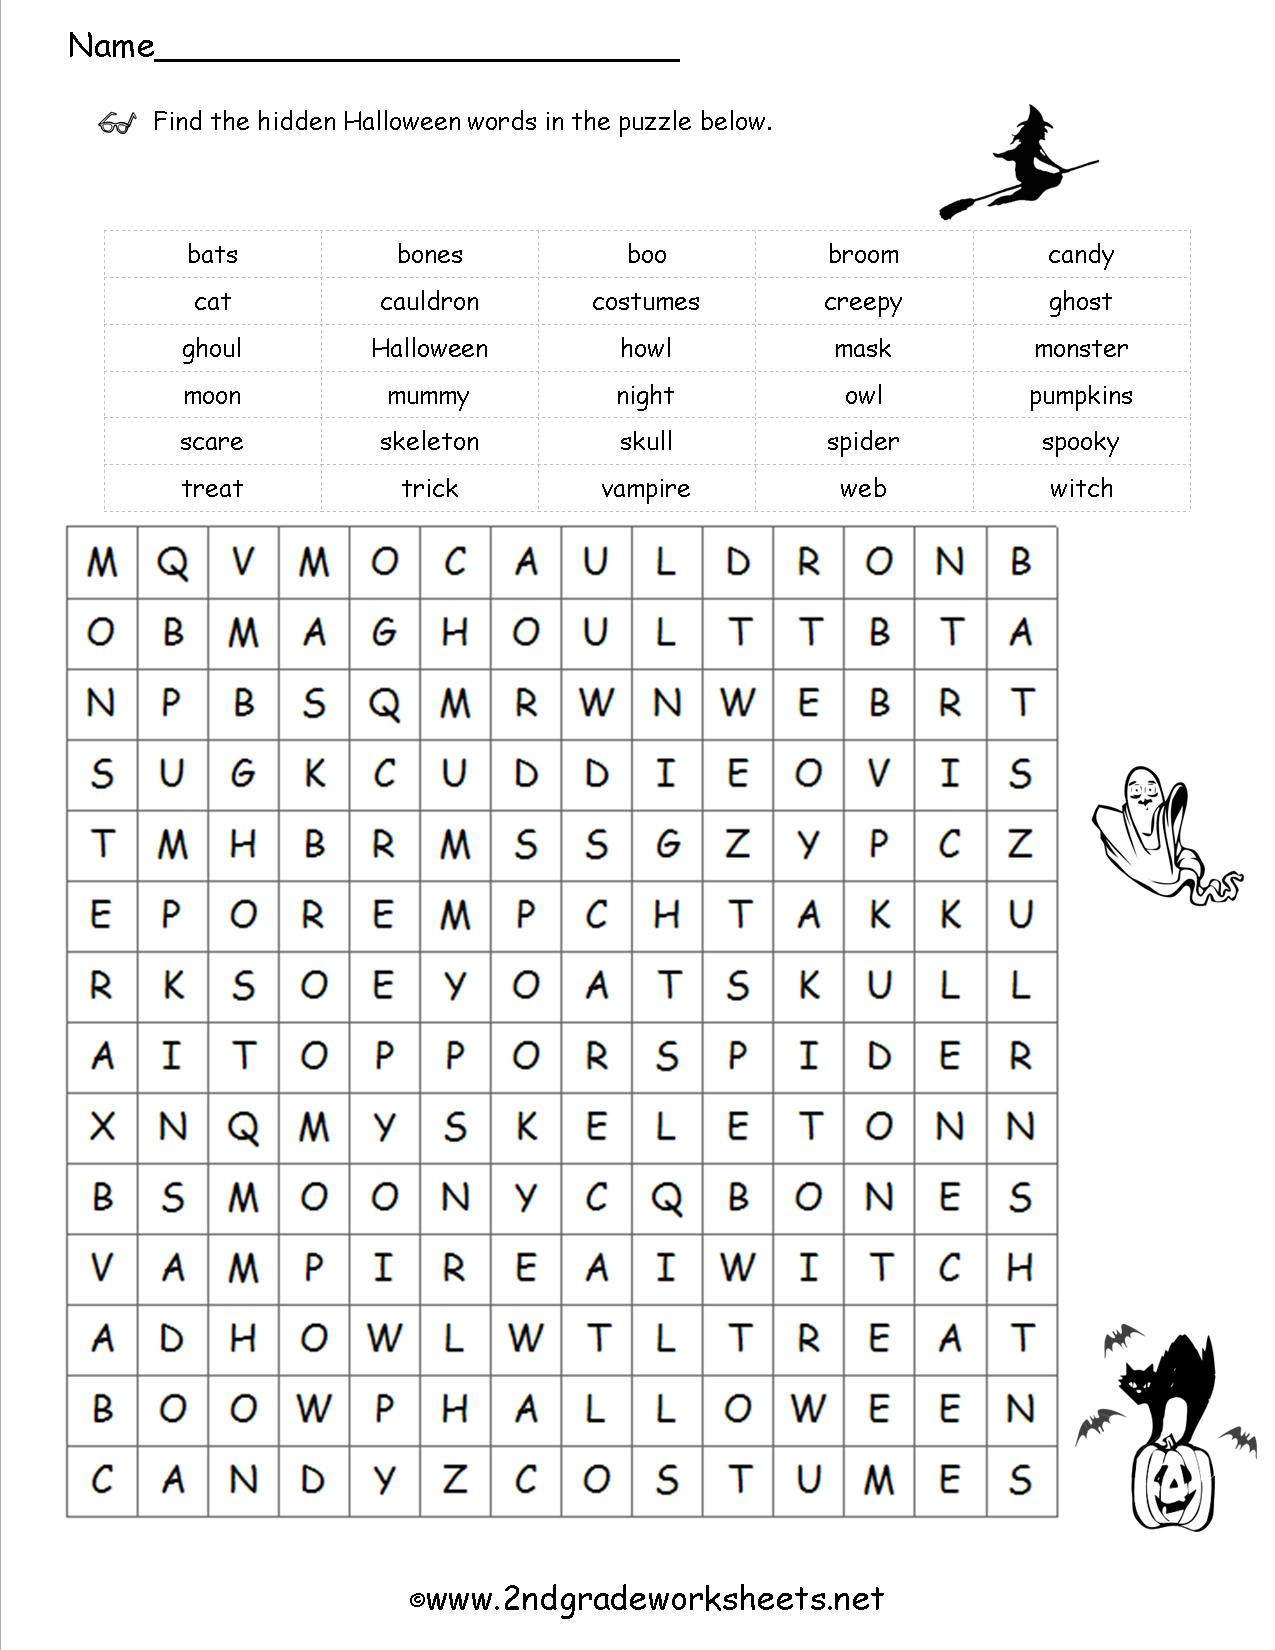 Halloween Worksheets And Printouts - Printable Halloween Puzzles For Middle School